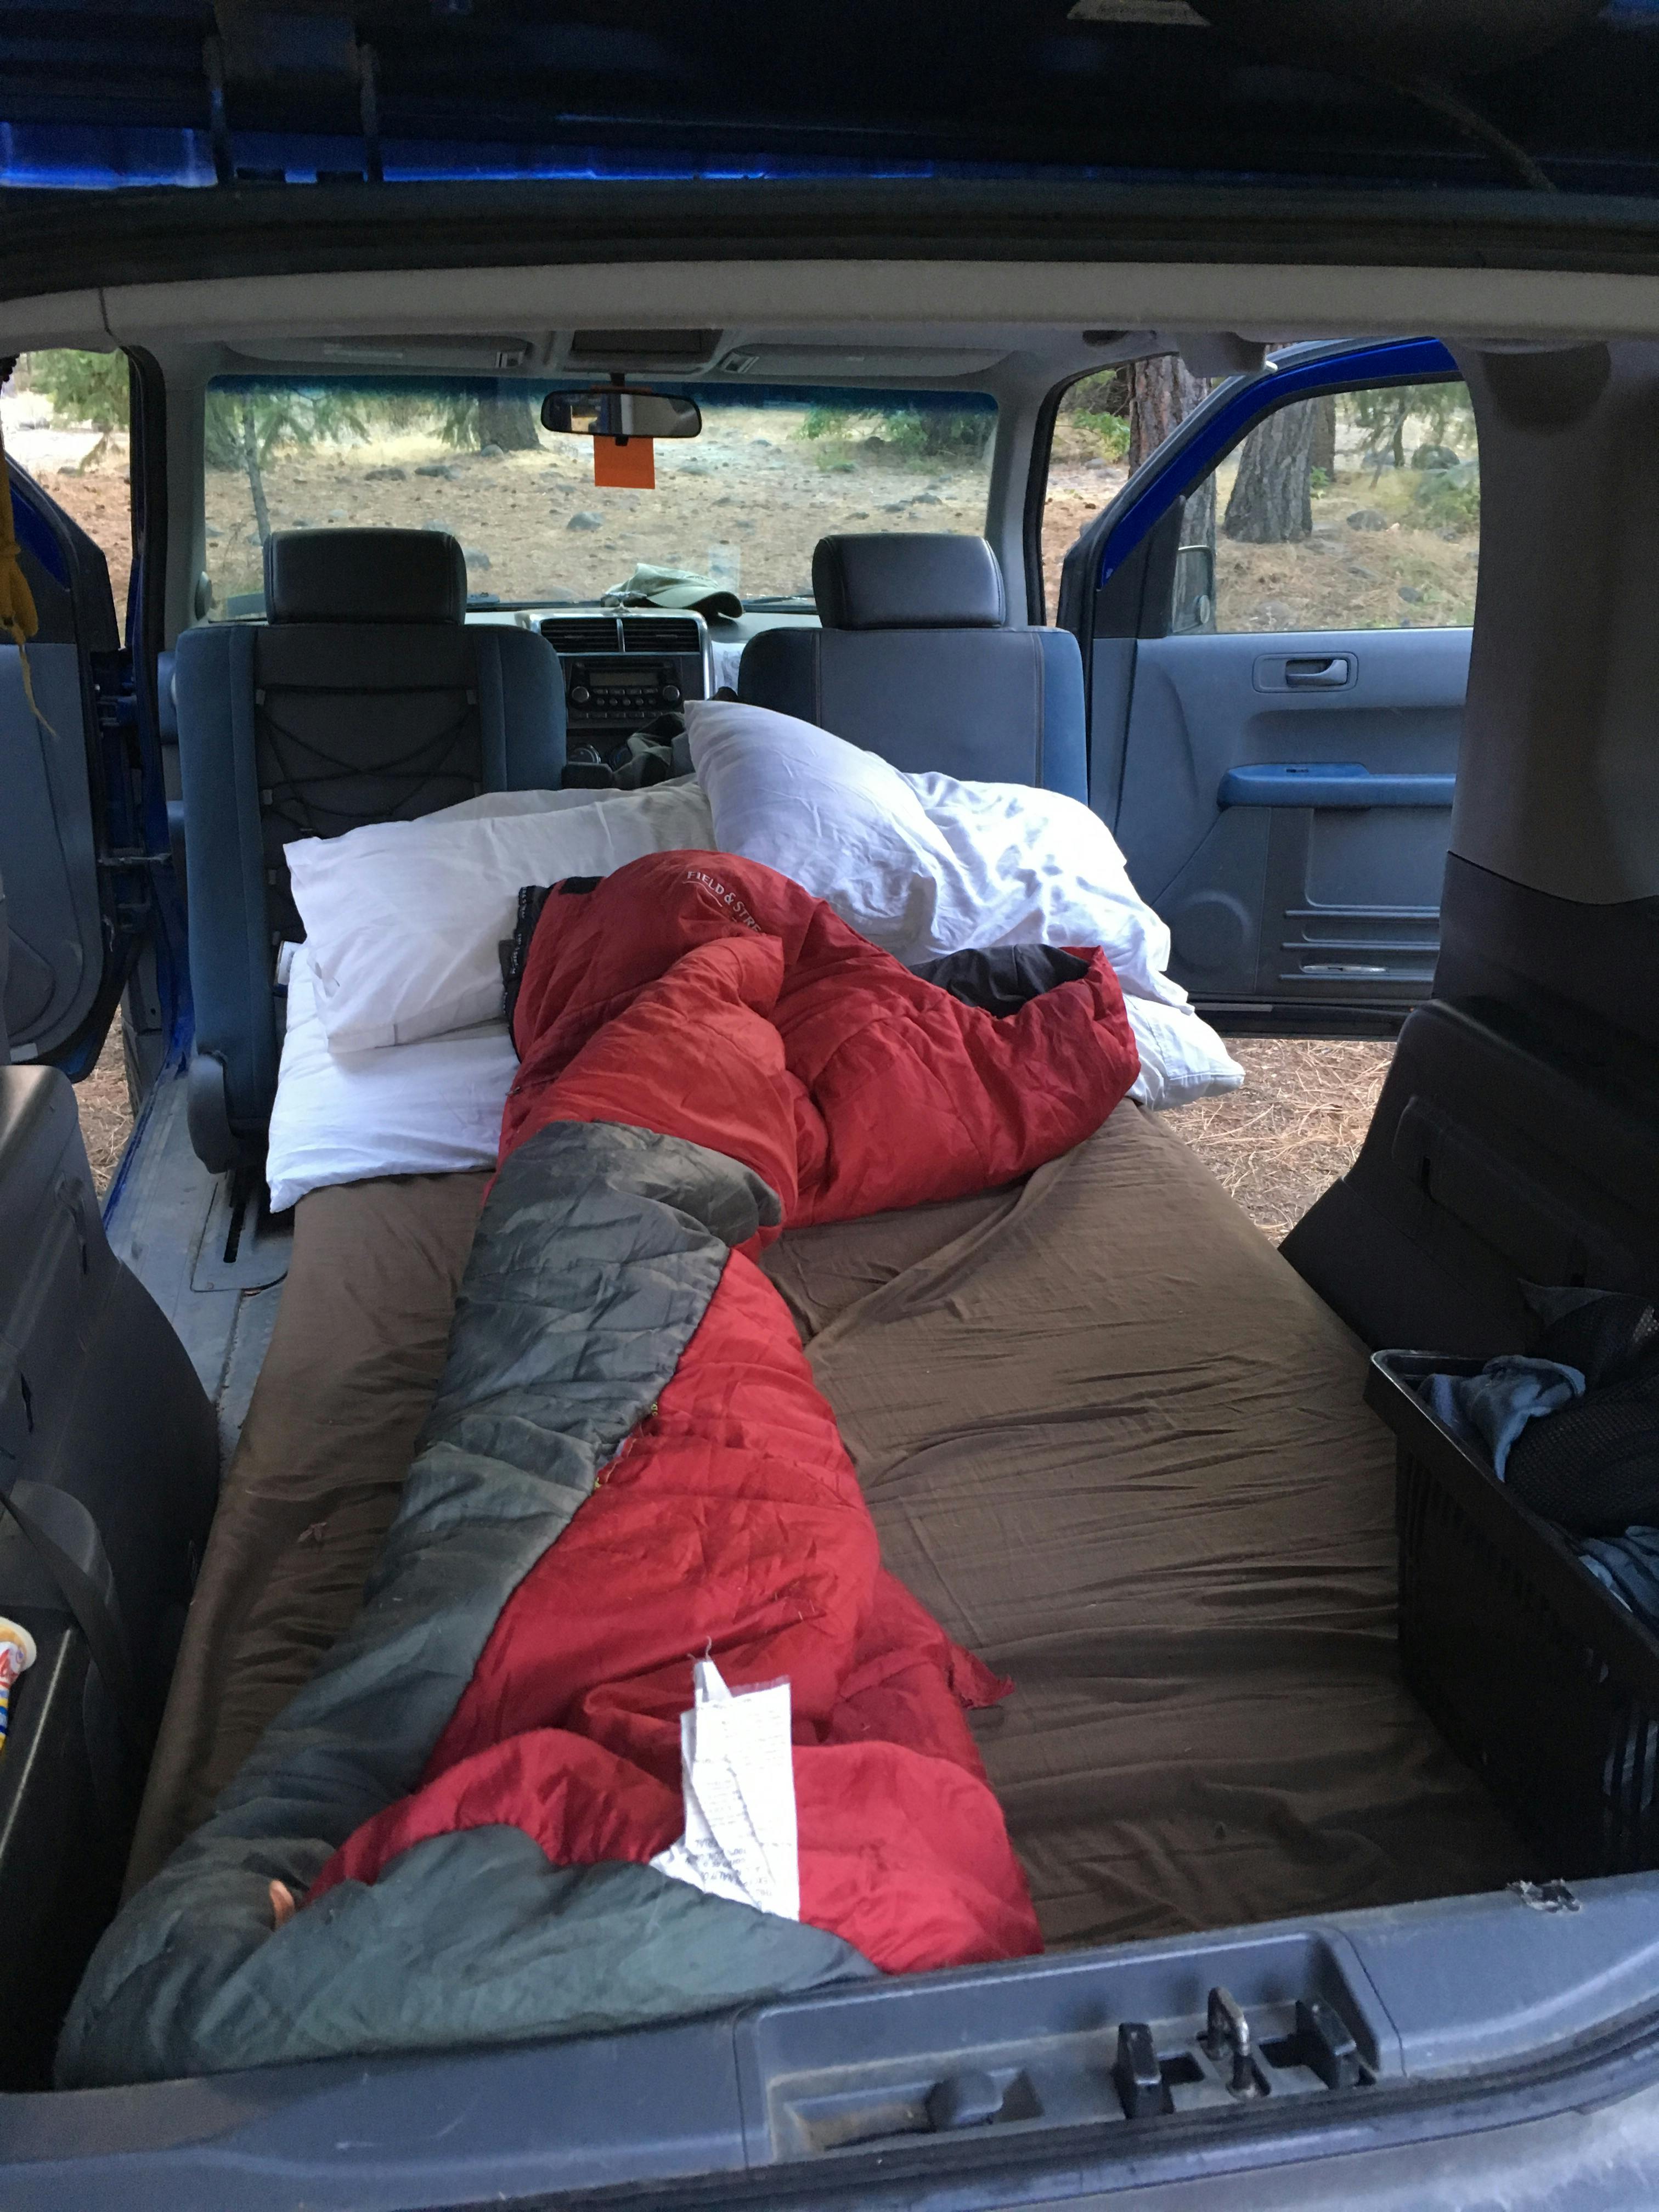 A red and grey sleeping bag on a sleeping pad set up inside an SUV